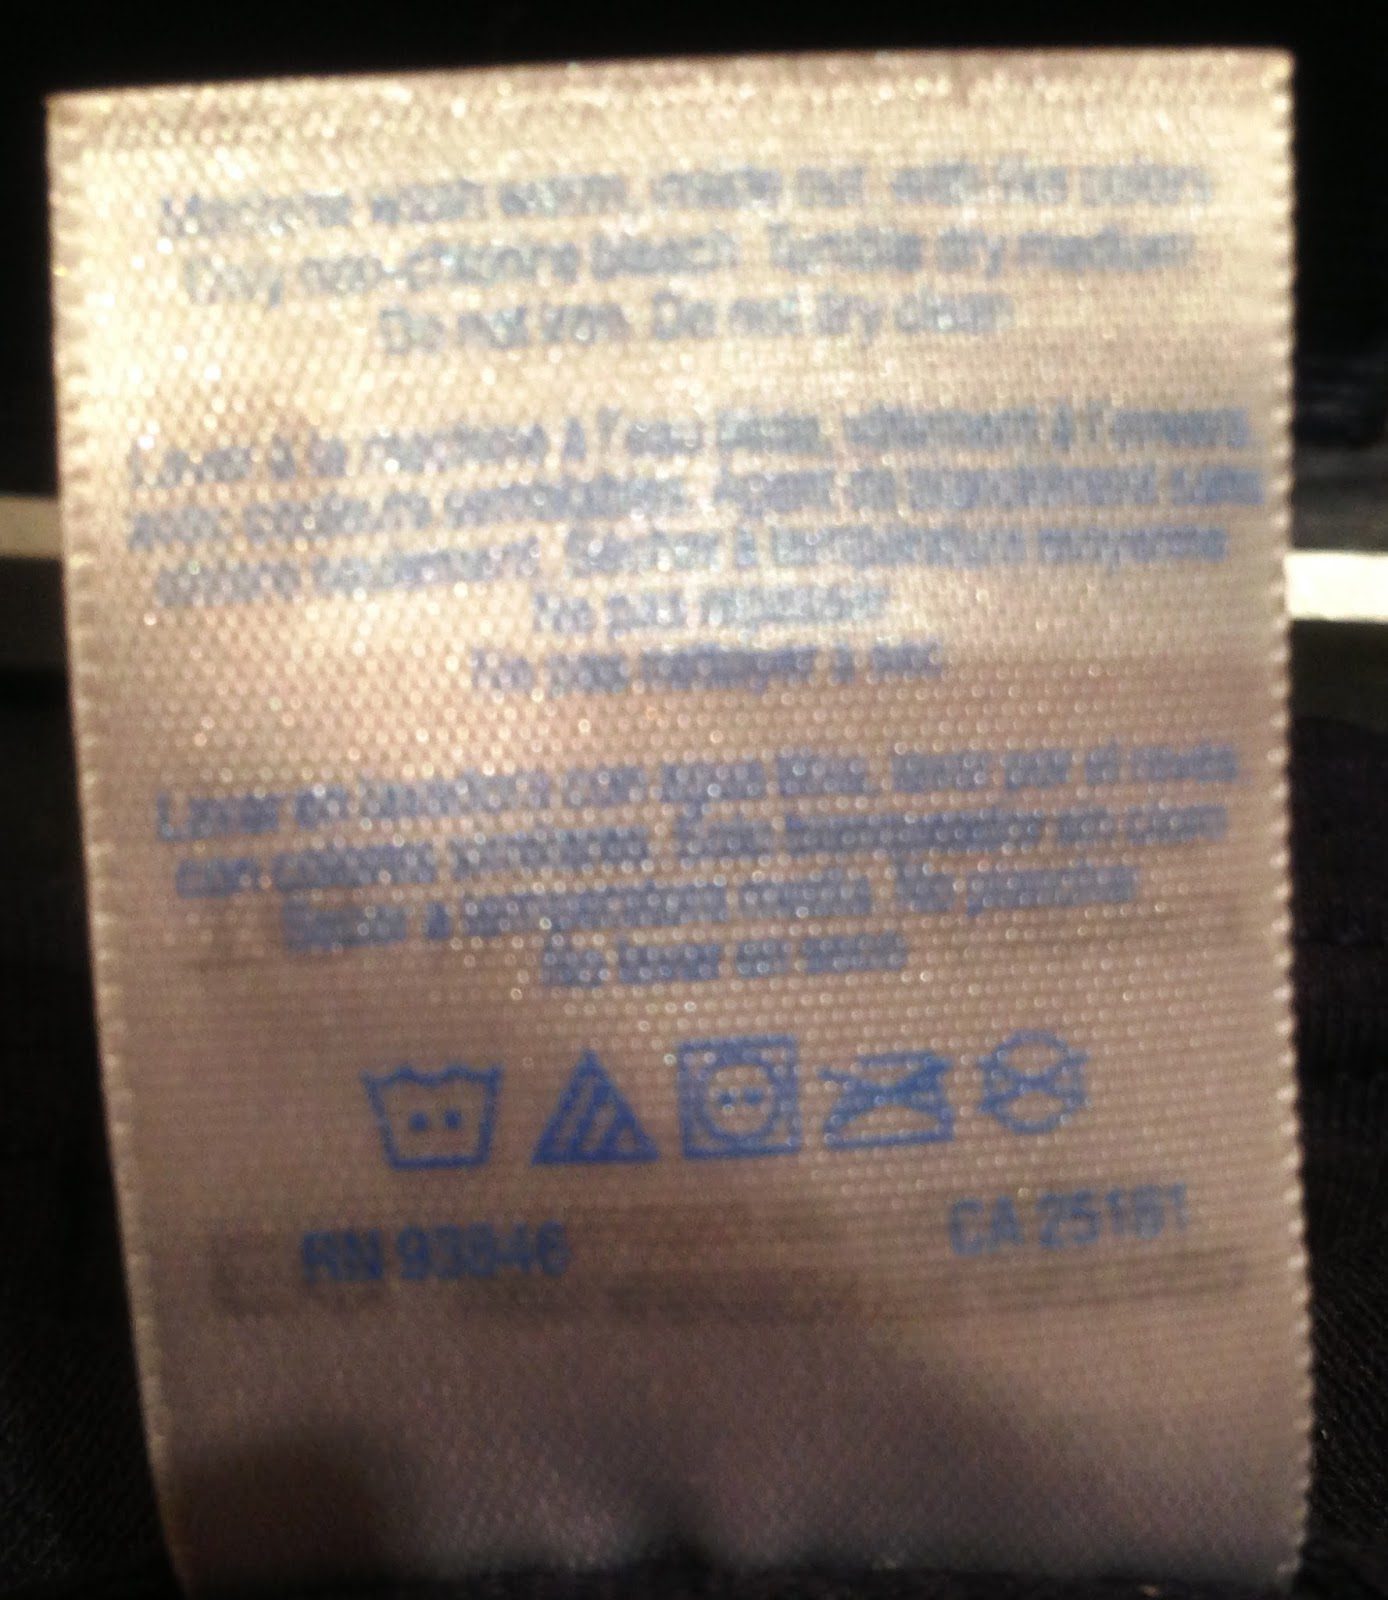 clothing label tag - care instructions